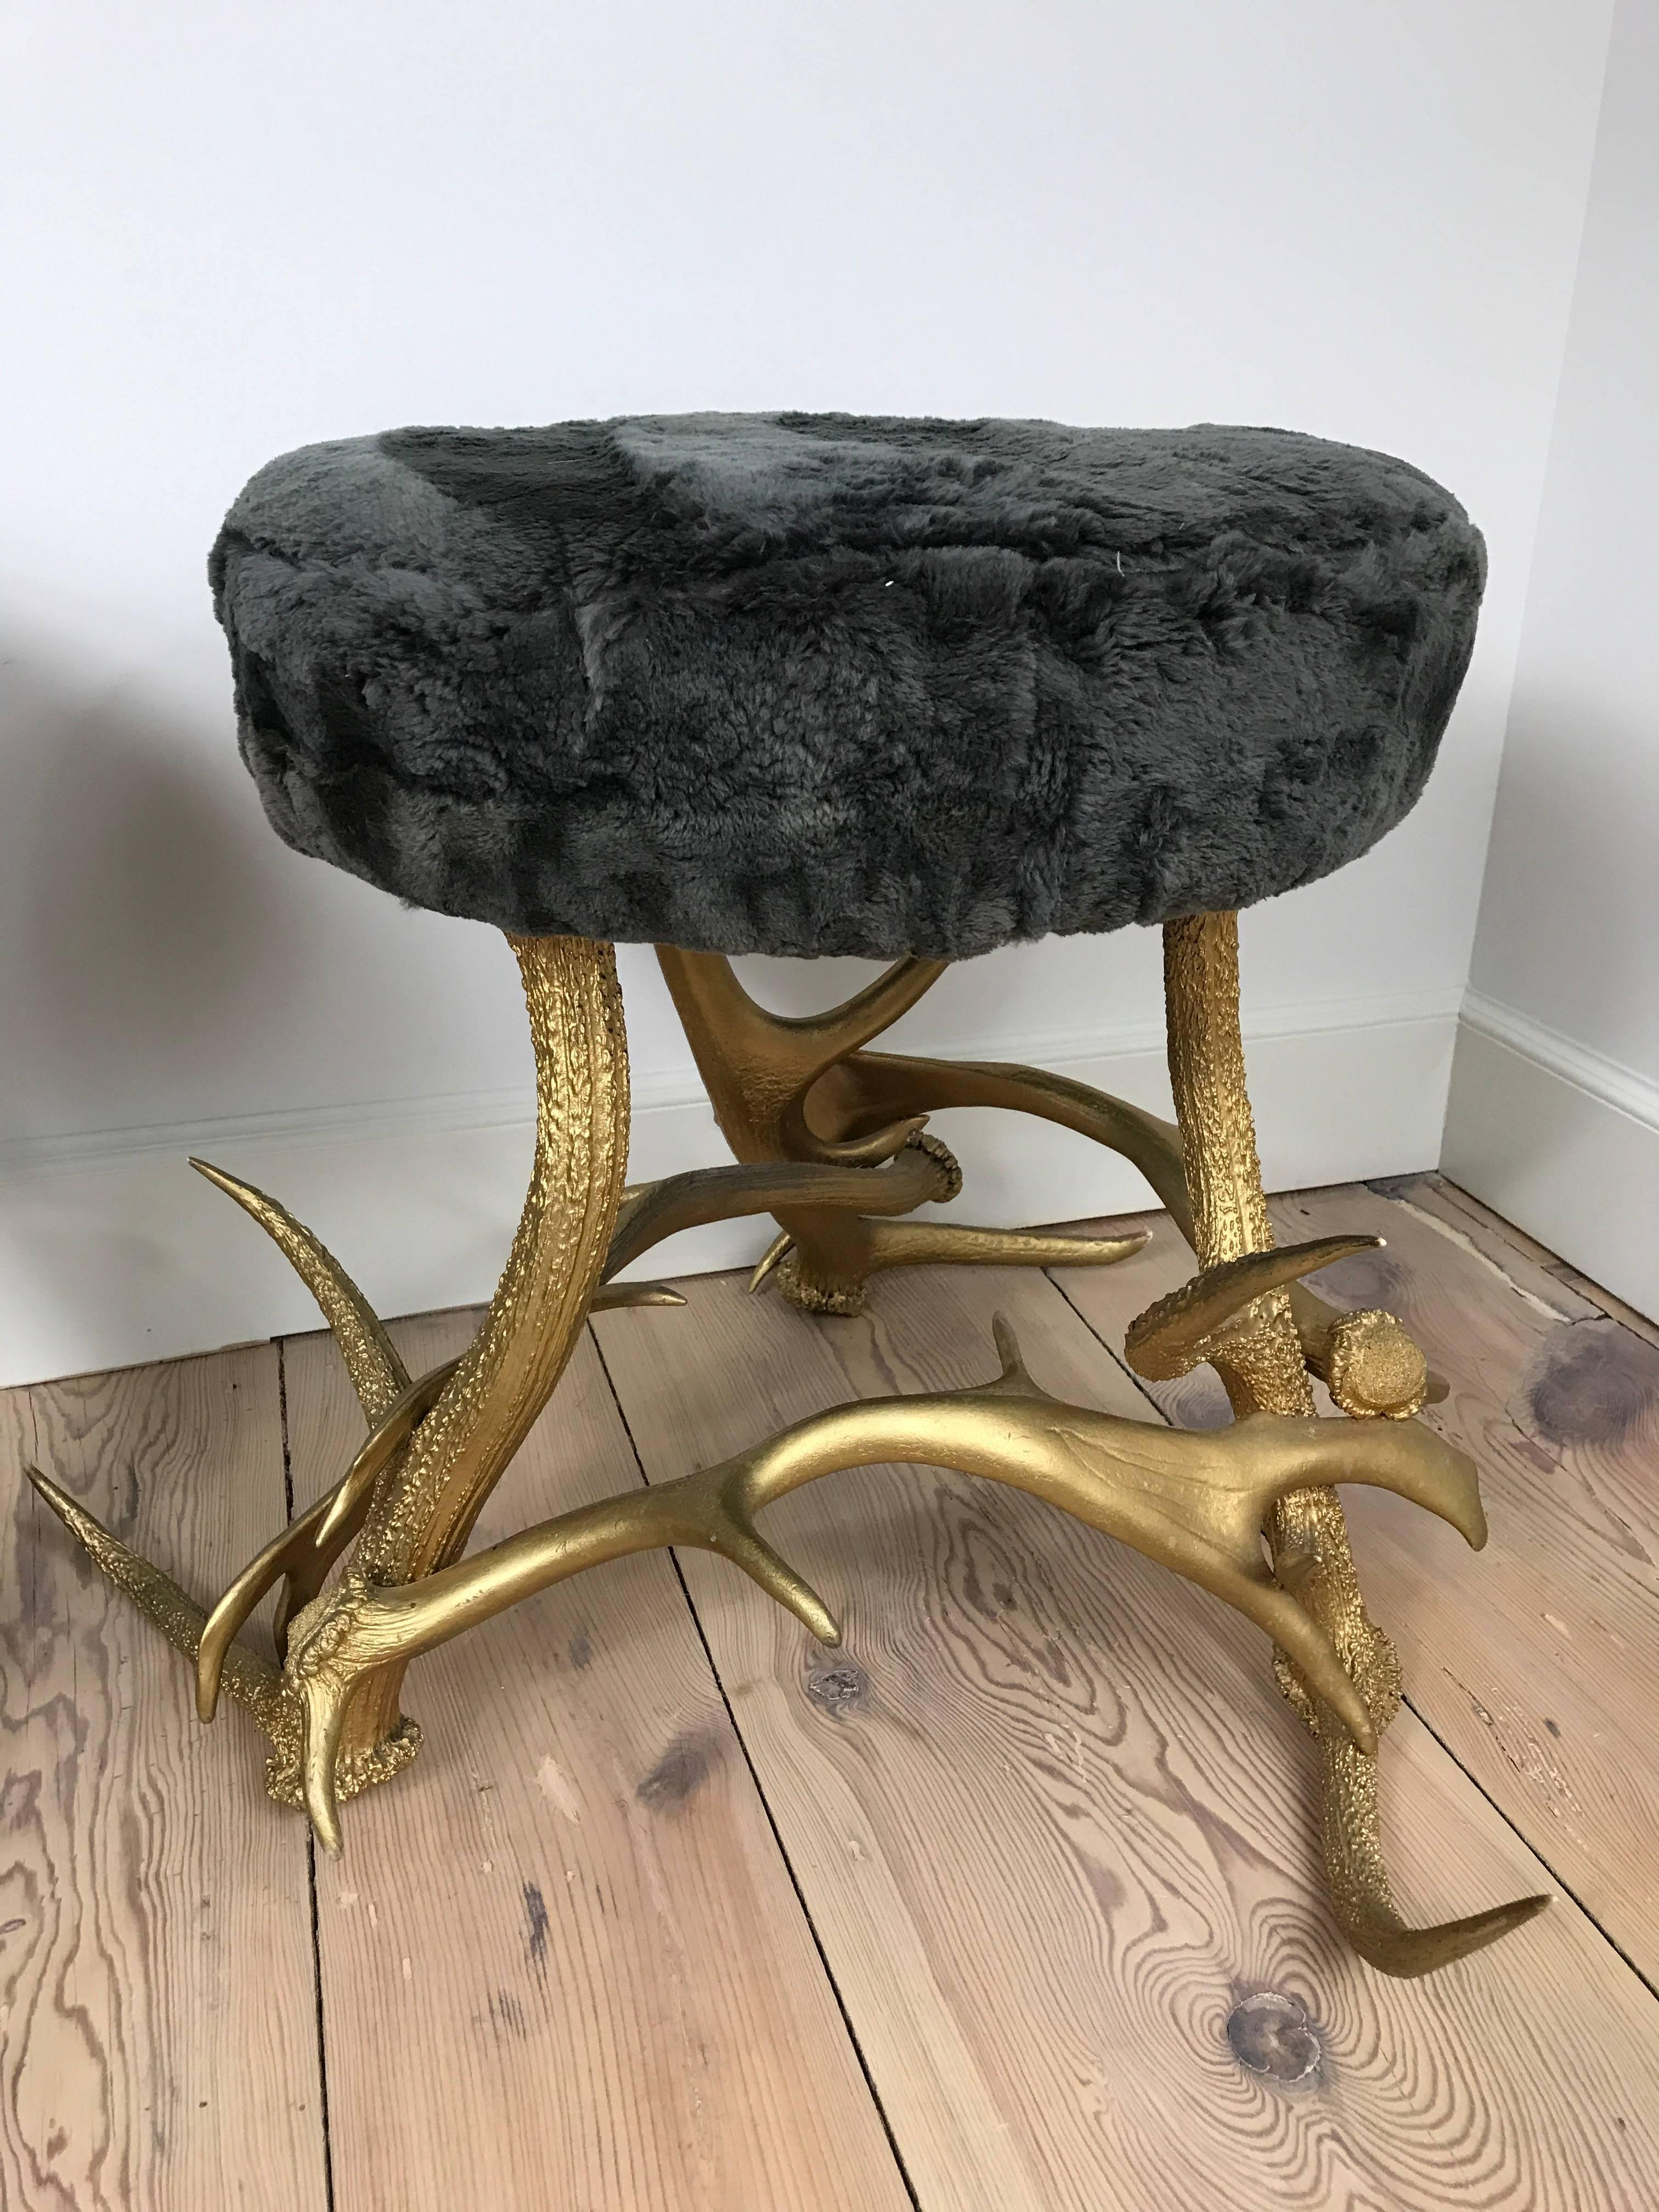 Unknown Pair of Antler Stools with Beaver Fur Seats